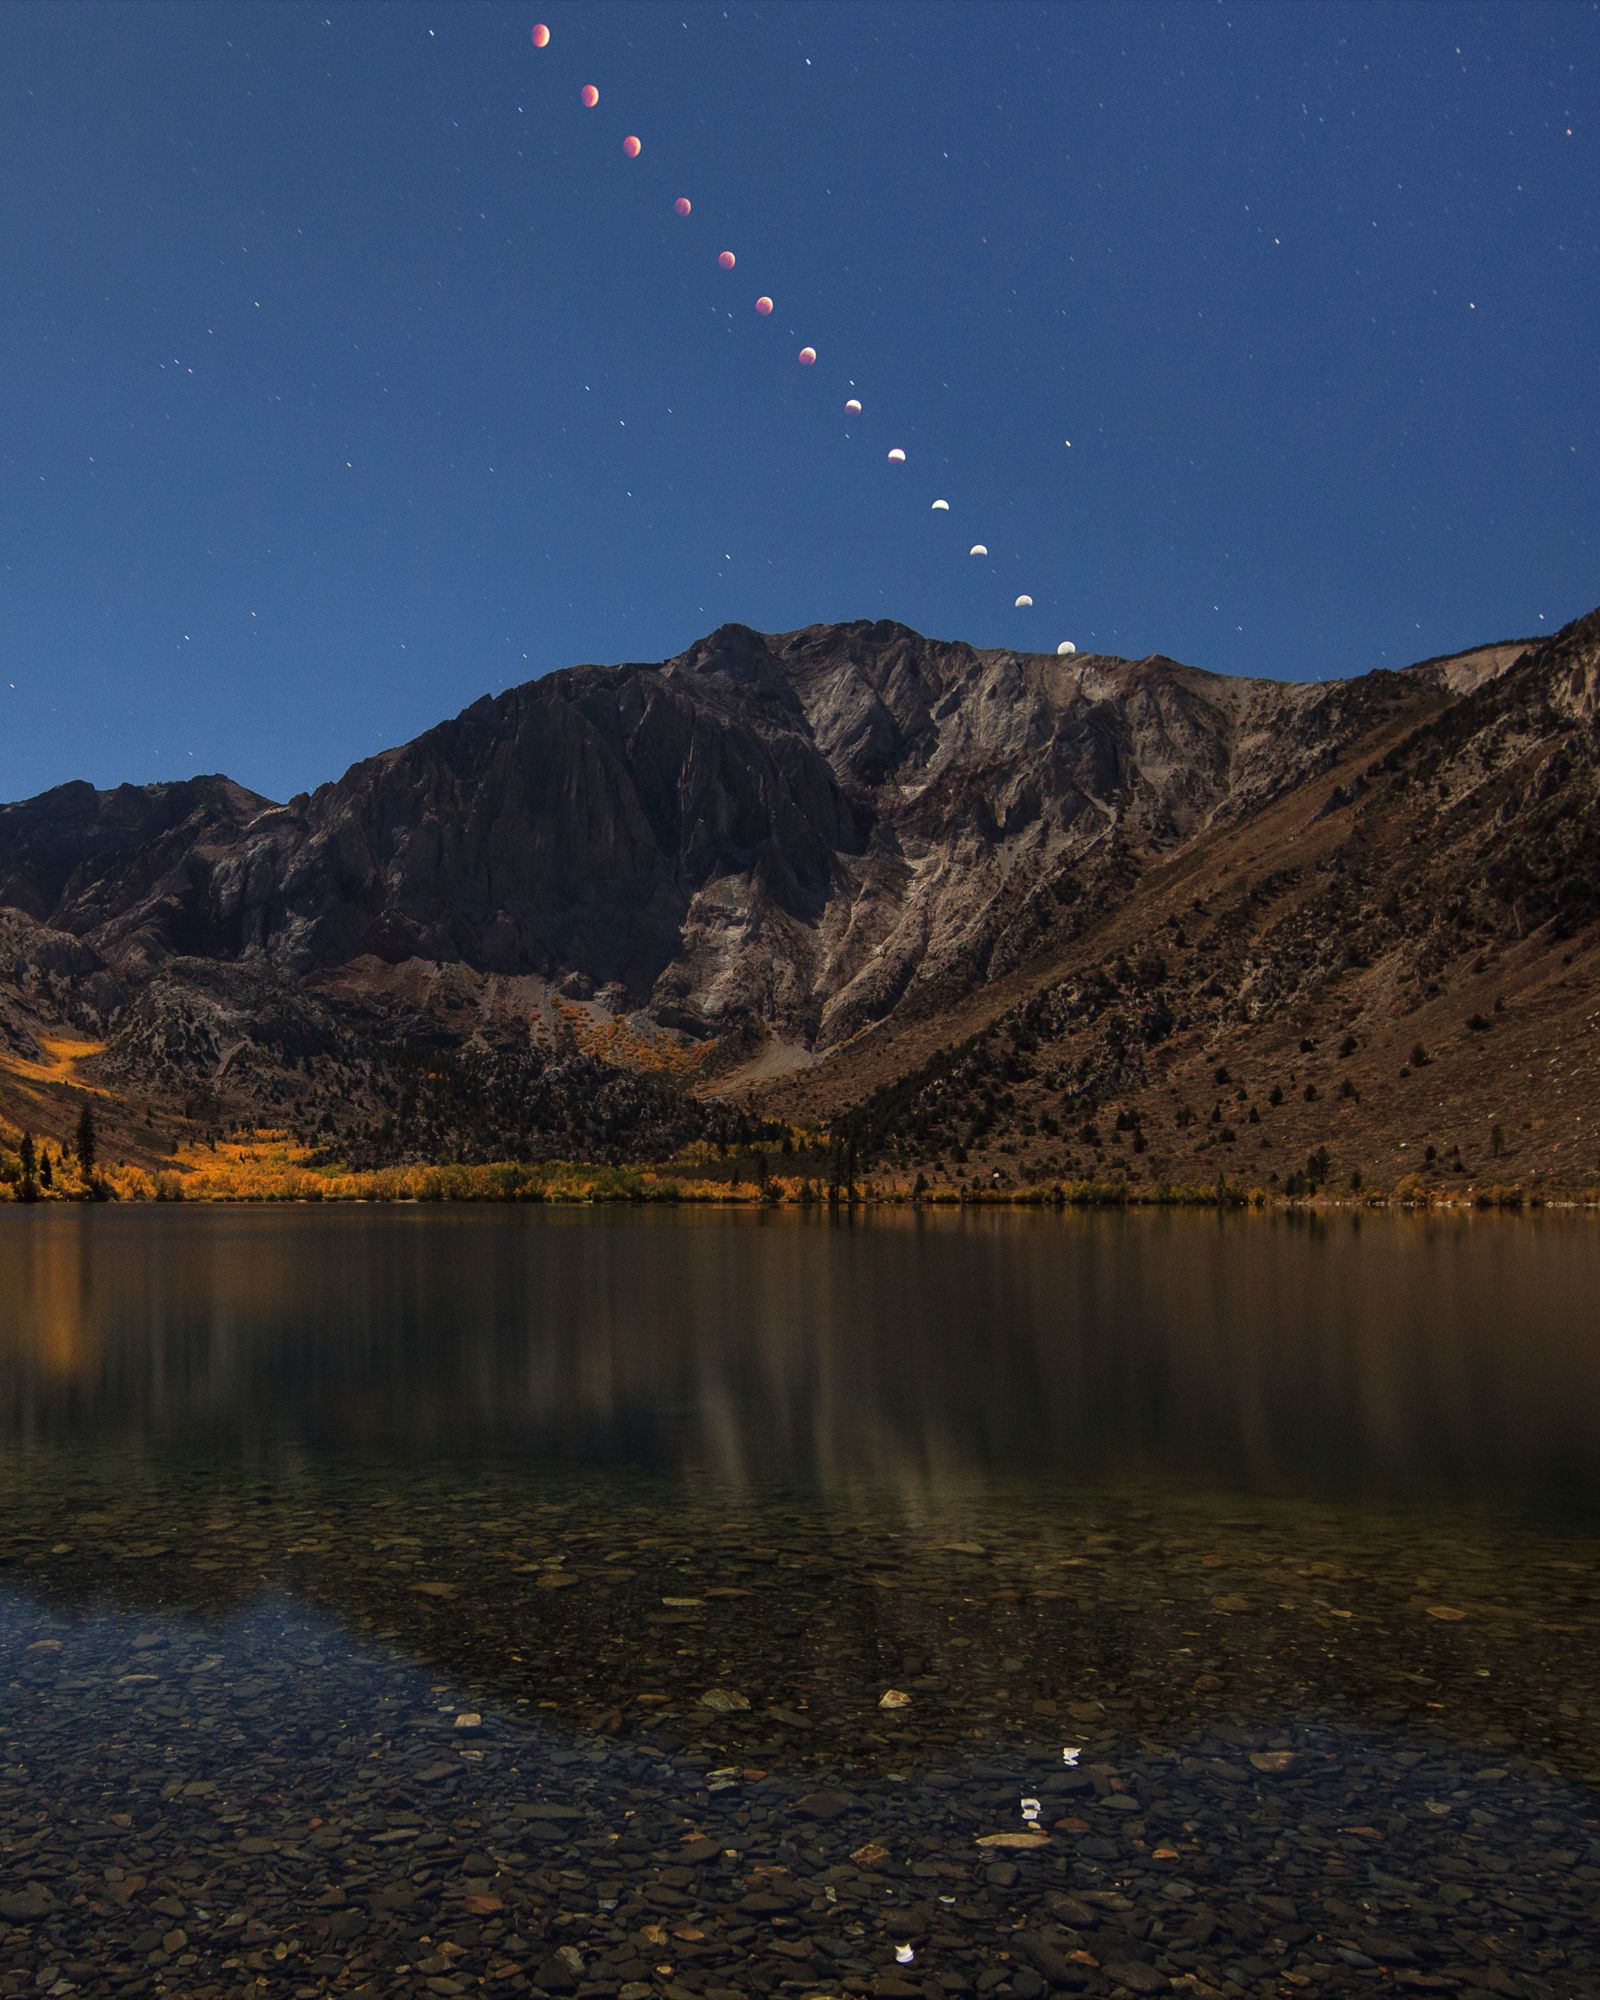 21 of the best astronomy photographs that are out of this world image 8